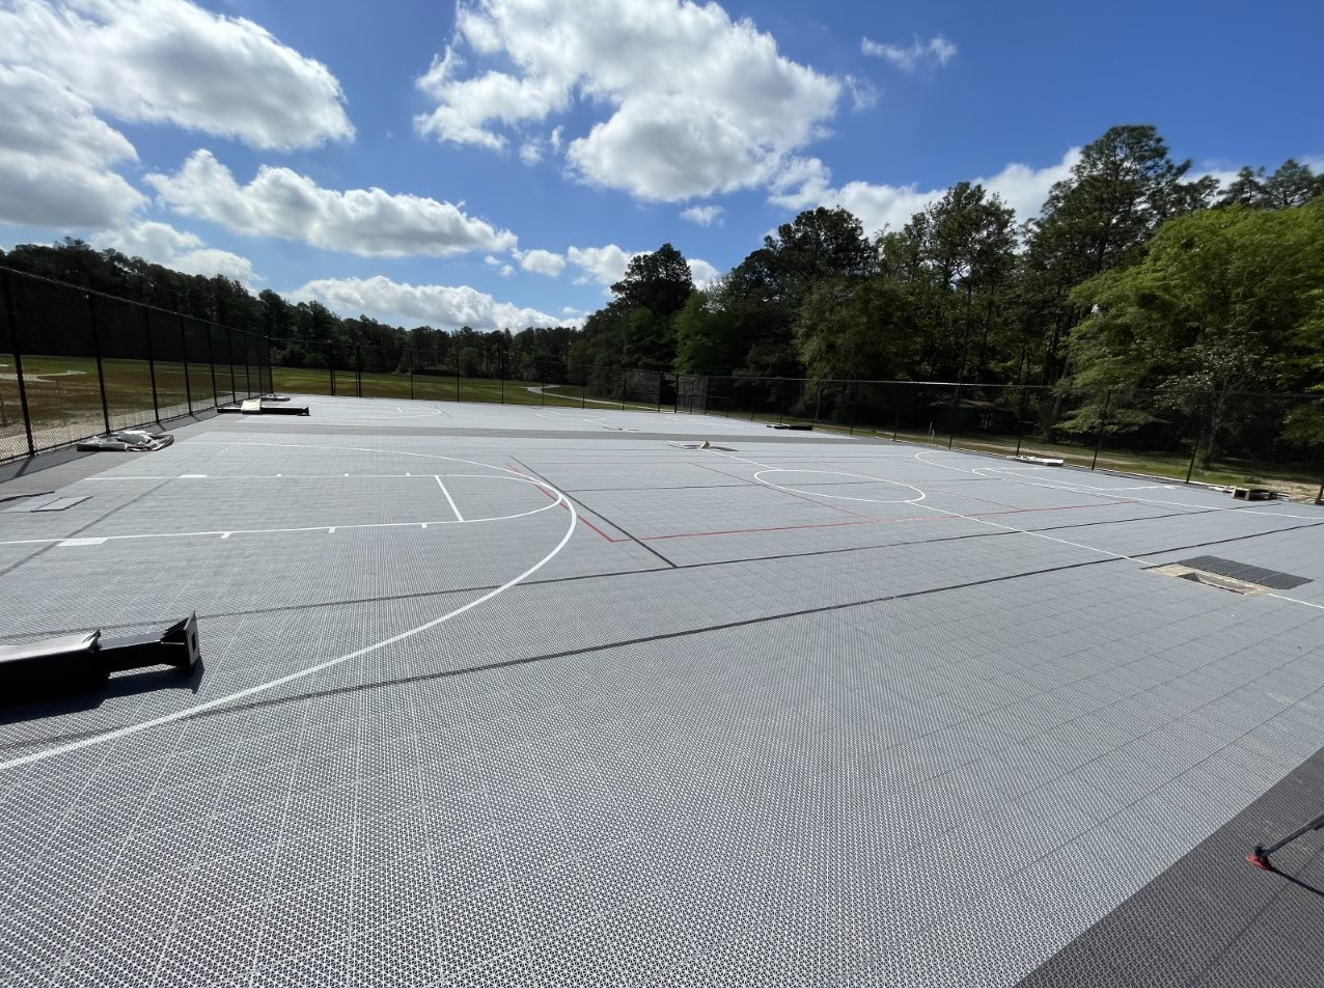 New multi-use courts under construction at Chickasabogue Park. Featuring a VersaCourt base configured for basketball, tennis or pickleball